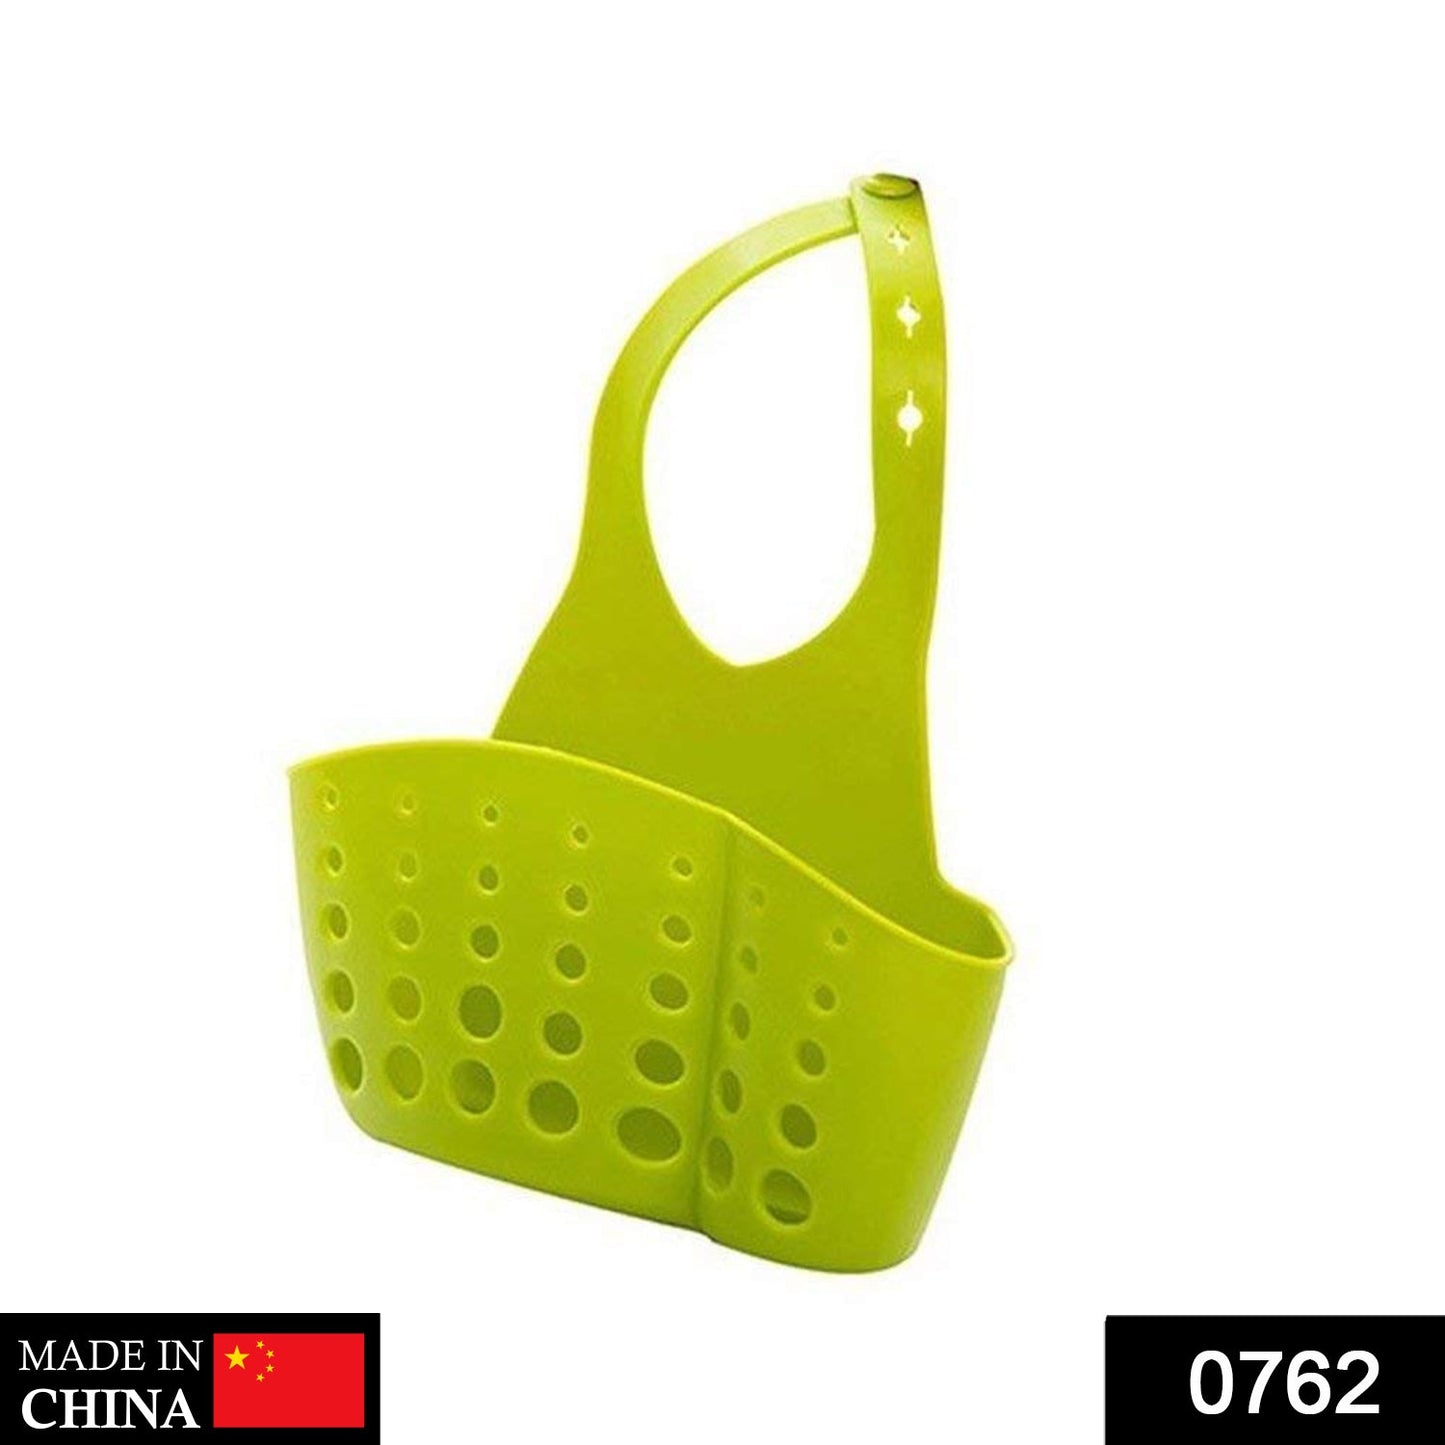 762 Adjustable Kitchen Bathroom Water Drainage Plastic Basket/Bag with Faucet Sink Caddy DeoDap